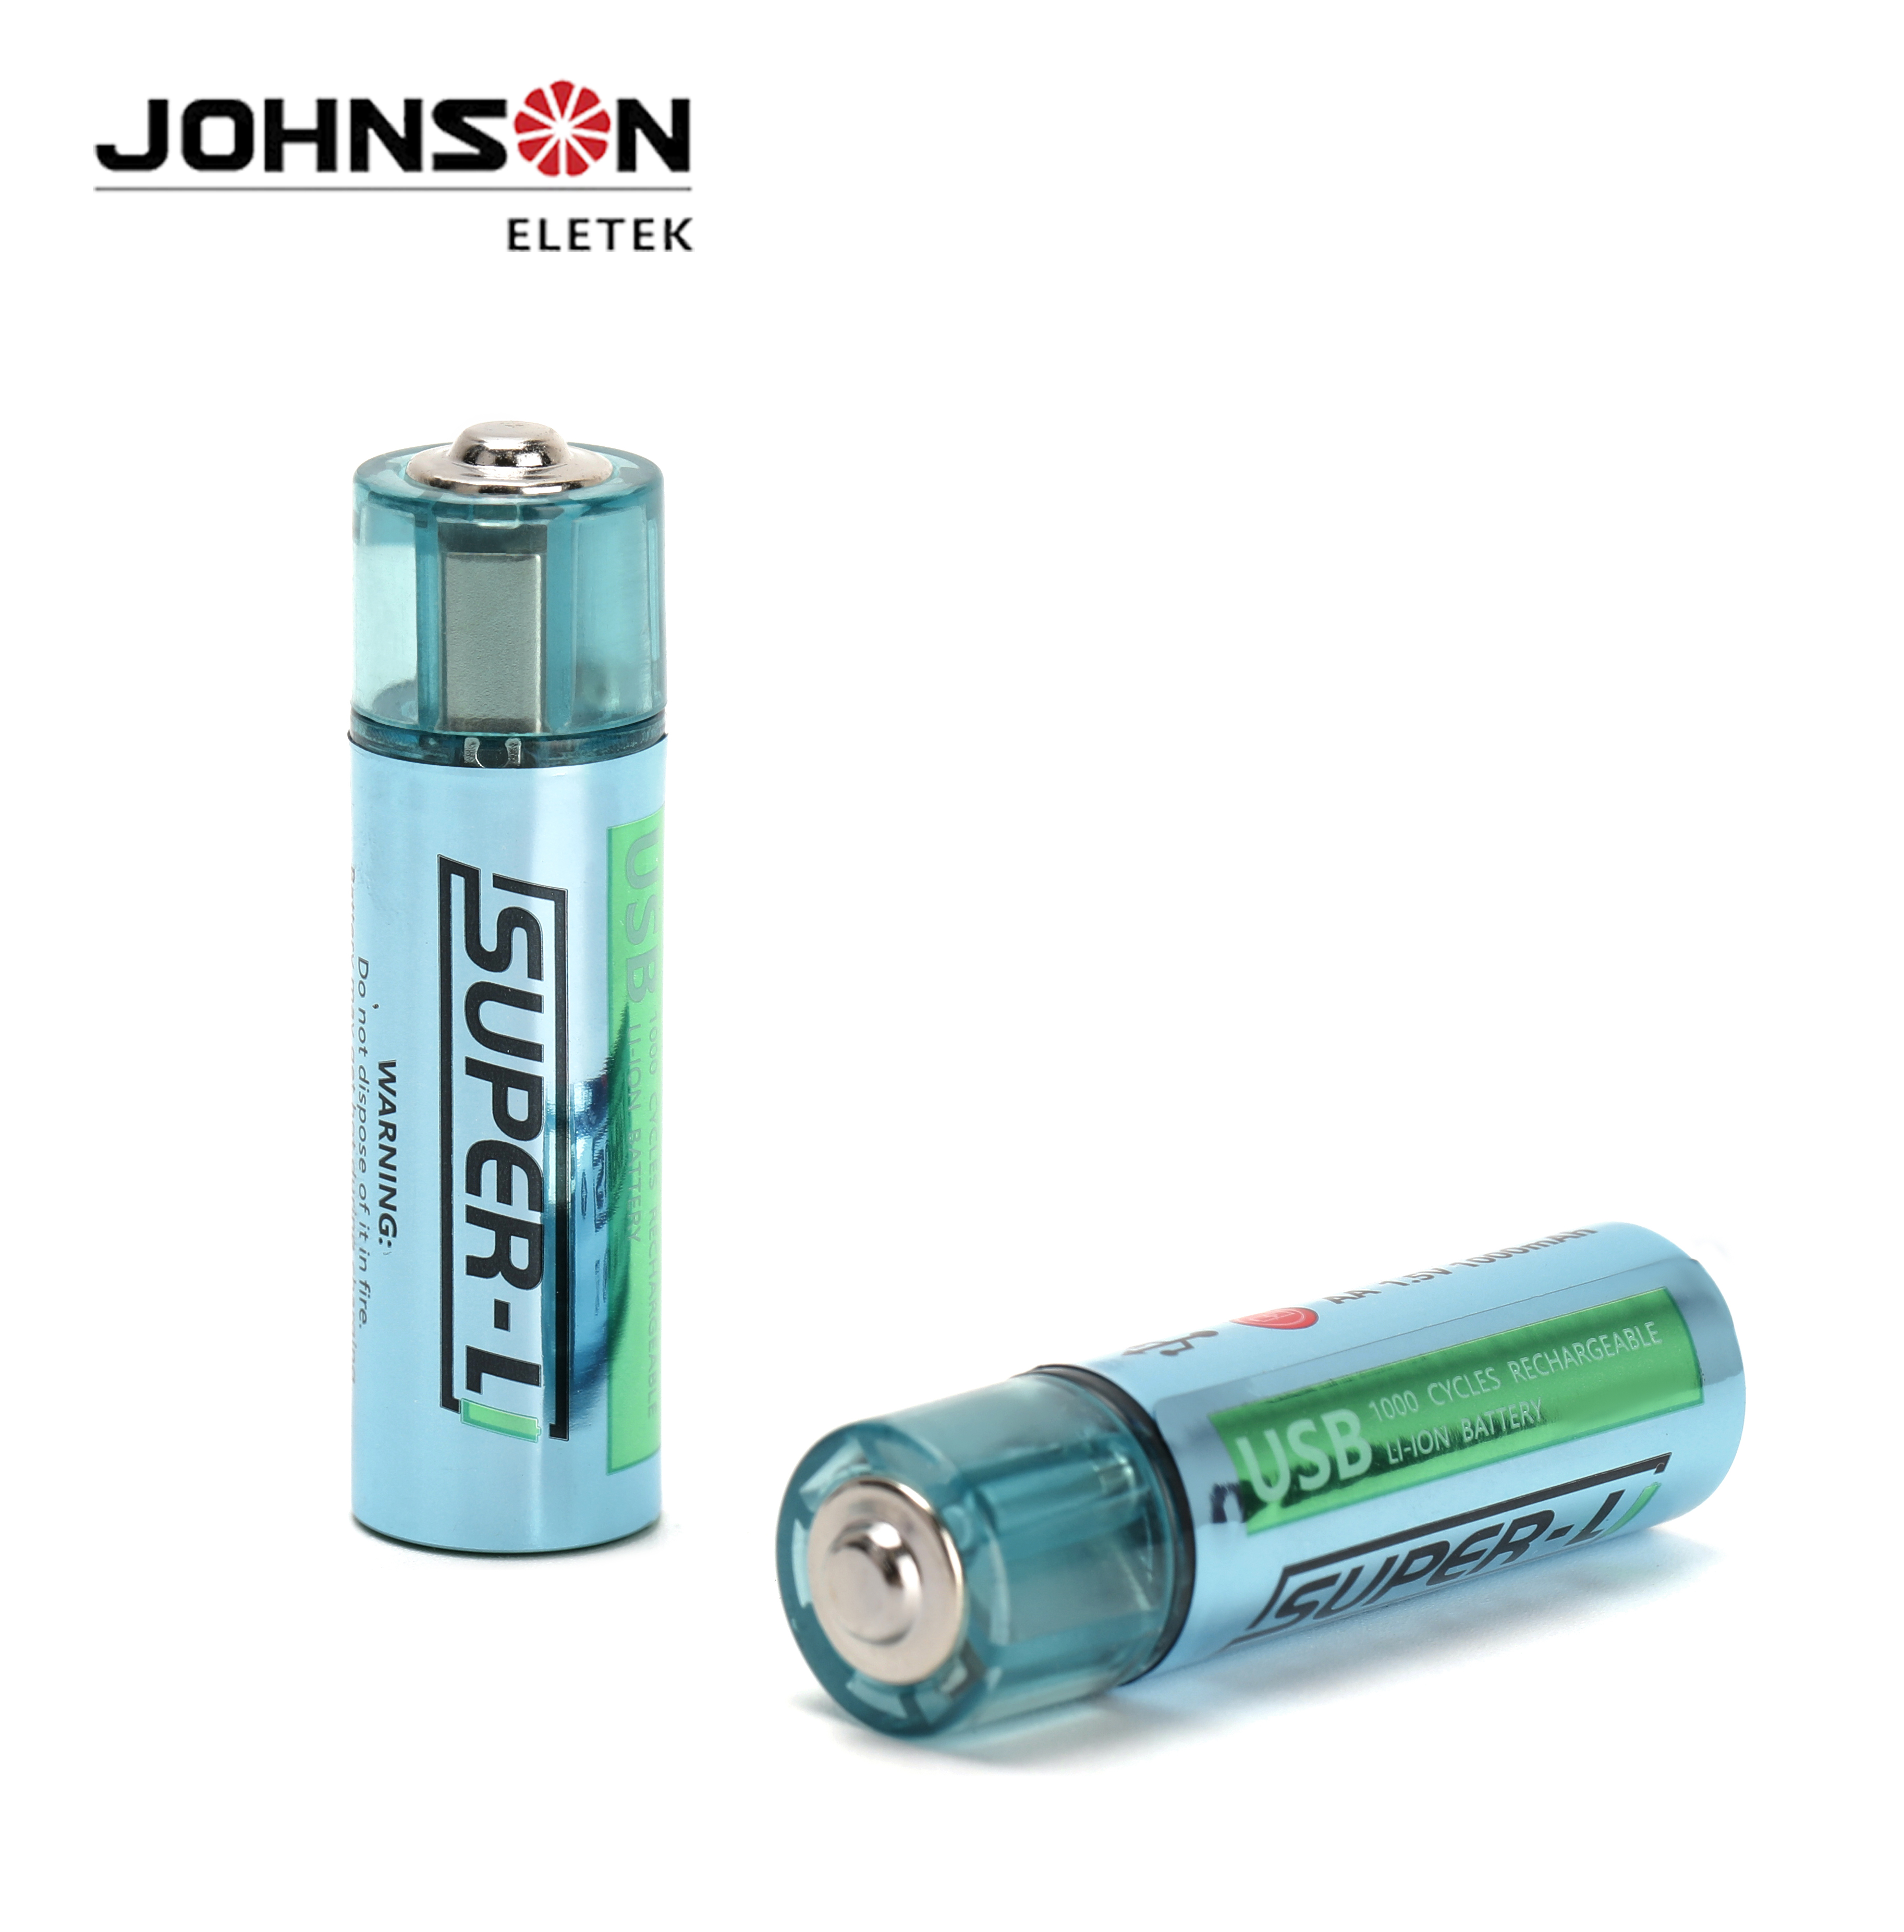 Rechargeable li-on battery with USB cable